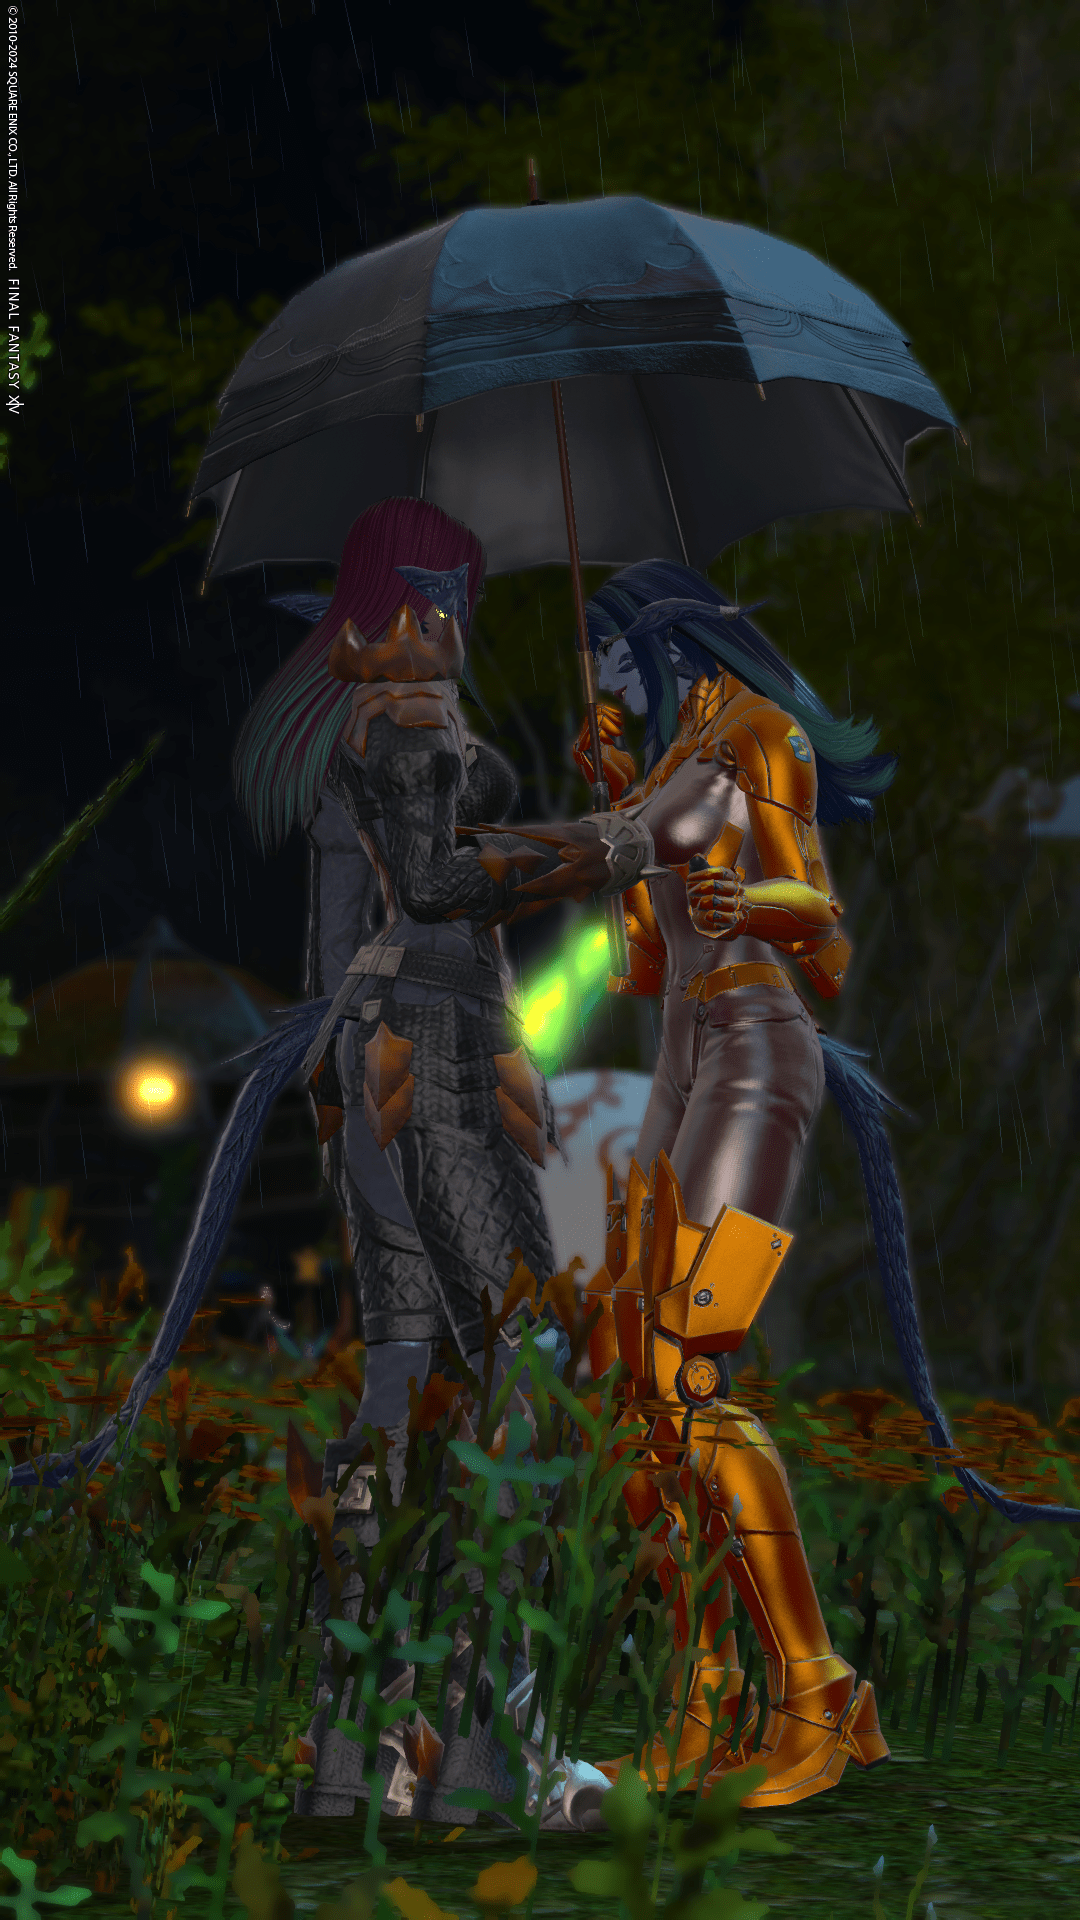 Lizicus holding an umbrella over Laureine in the Rain at night time.